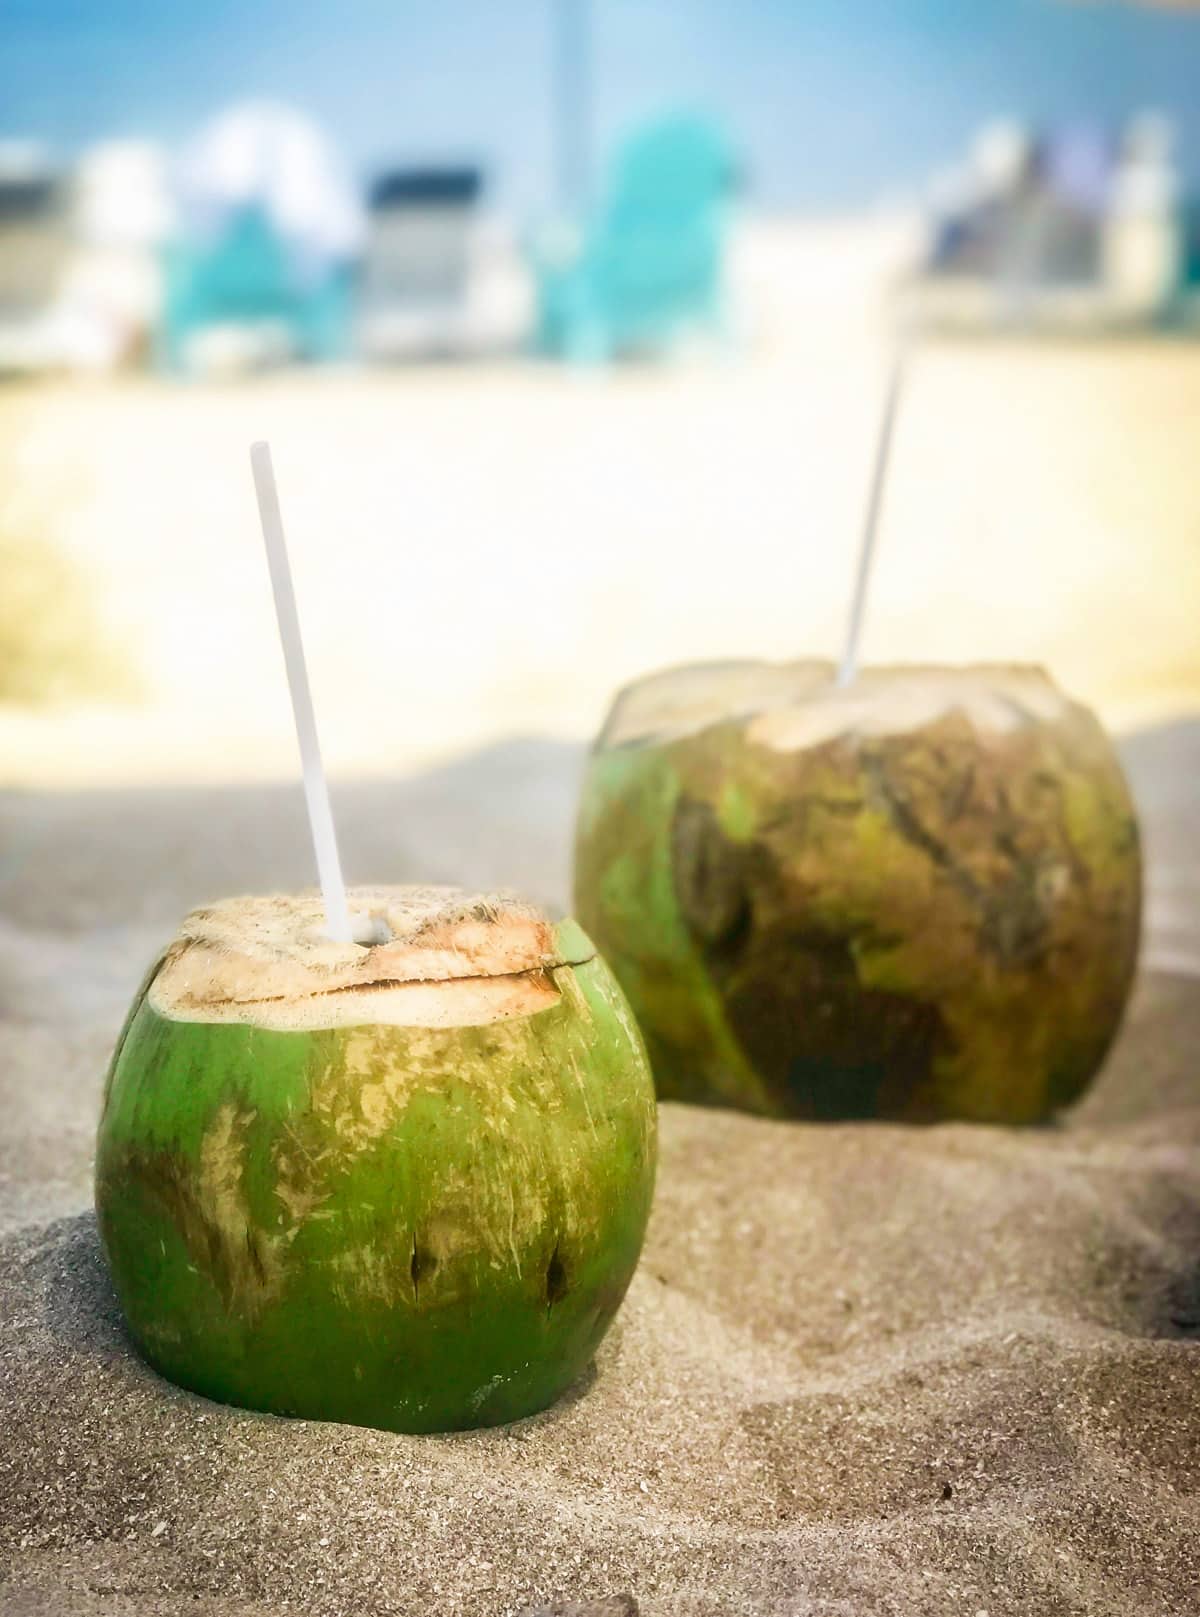 Fresh coconuts on the beach bar at Villa del Palmar at the Islands of Loreto. Looking for the BEST vacation destination to treat yourself? From a quiet getaway to soak up the sun or to enjoy your honeymoon, the Villa del Palmar at the Islands of Loreto, Mexico is one of those hidden gems you need to visit for yourself. This unique, affordable resort is packed with fun activities such as golfing, kayaking, paddle boarding, snorkeling, scuba diving, yoga, dancing, whale watching, and fishing. Whatever you’re looking for in your upcoming getaway, Villa del Palmar offers it!